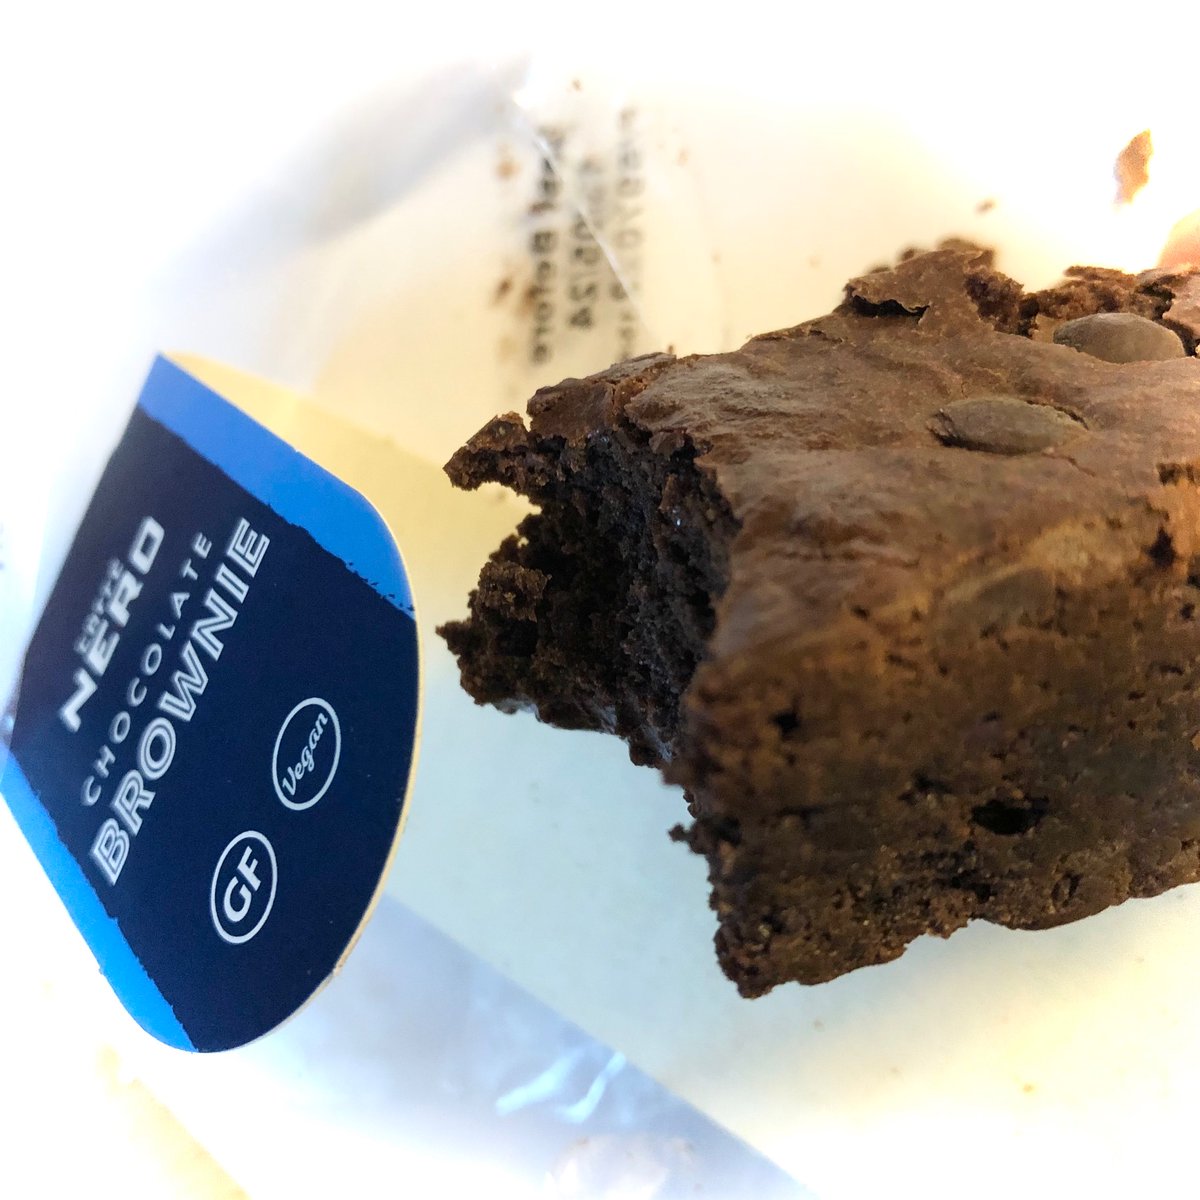 #veganhour @veganhour loved this #plantbased #chocolate brownie from @_CaffeNero_ #glutenfree as well made with #chickpeaflour (super chocolatey and truffle-like with a slight cracked top 😊